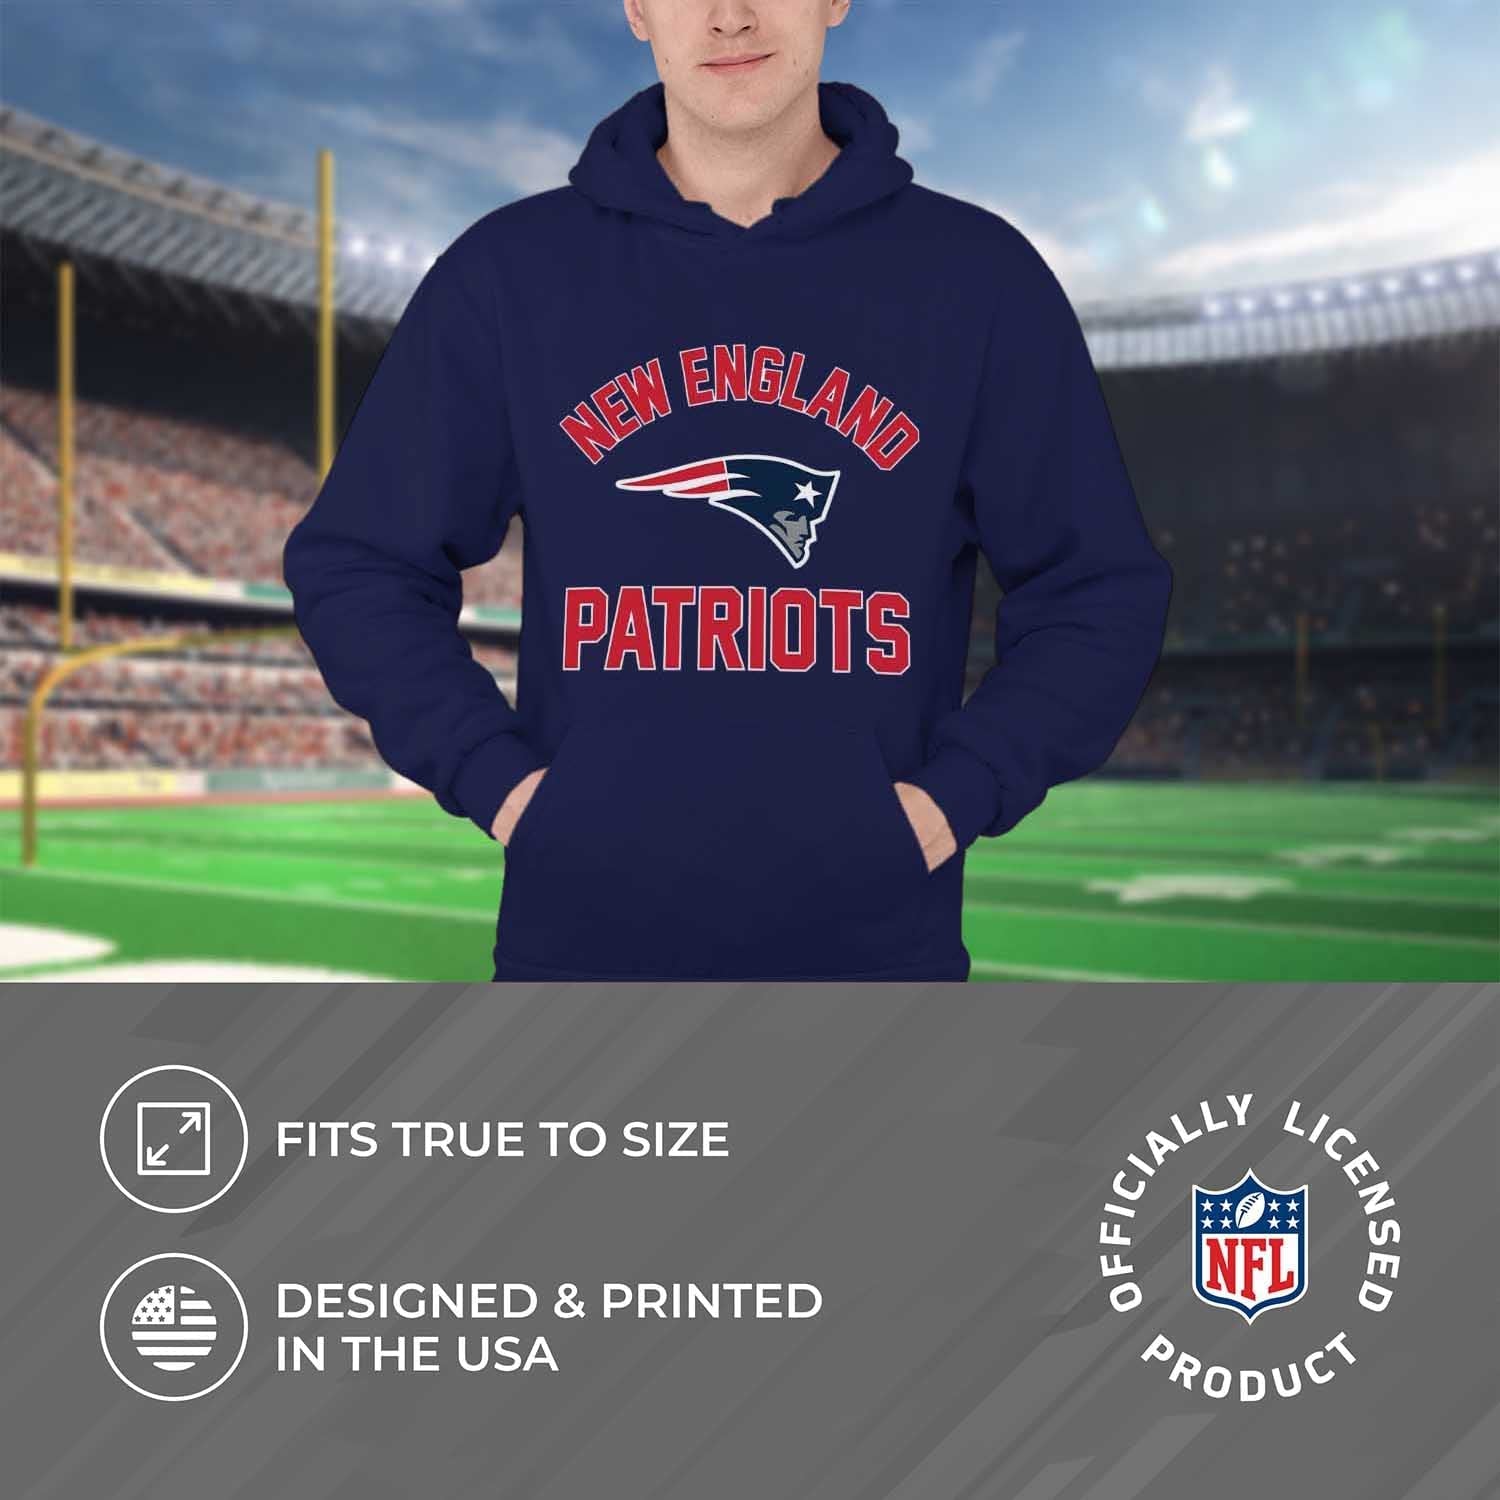 "Embrace Game Day Comfort and Show Team Pride with our NFL Adult Gameday Hooded Sweatshirt - Experience the Ultimate Fan Luxury in Luxurious Poly Fleece Blend"